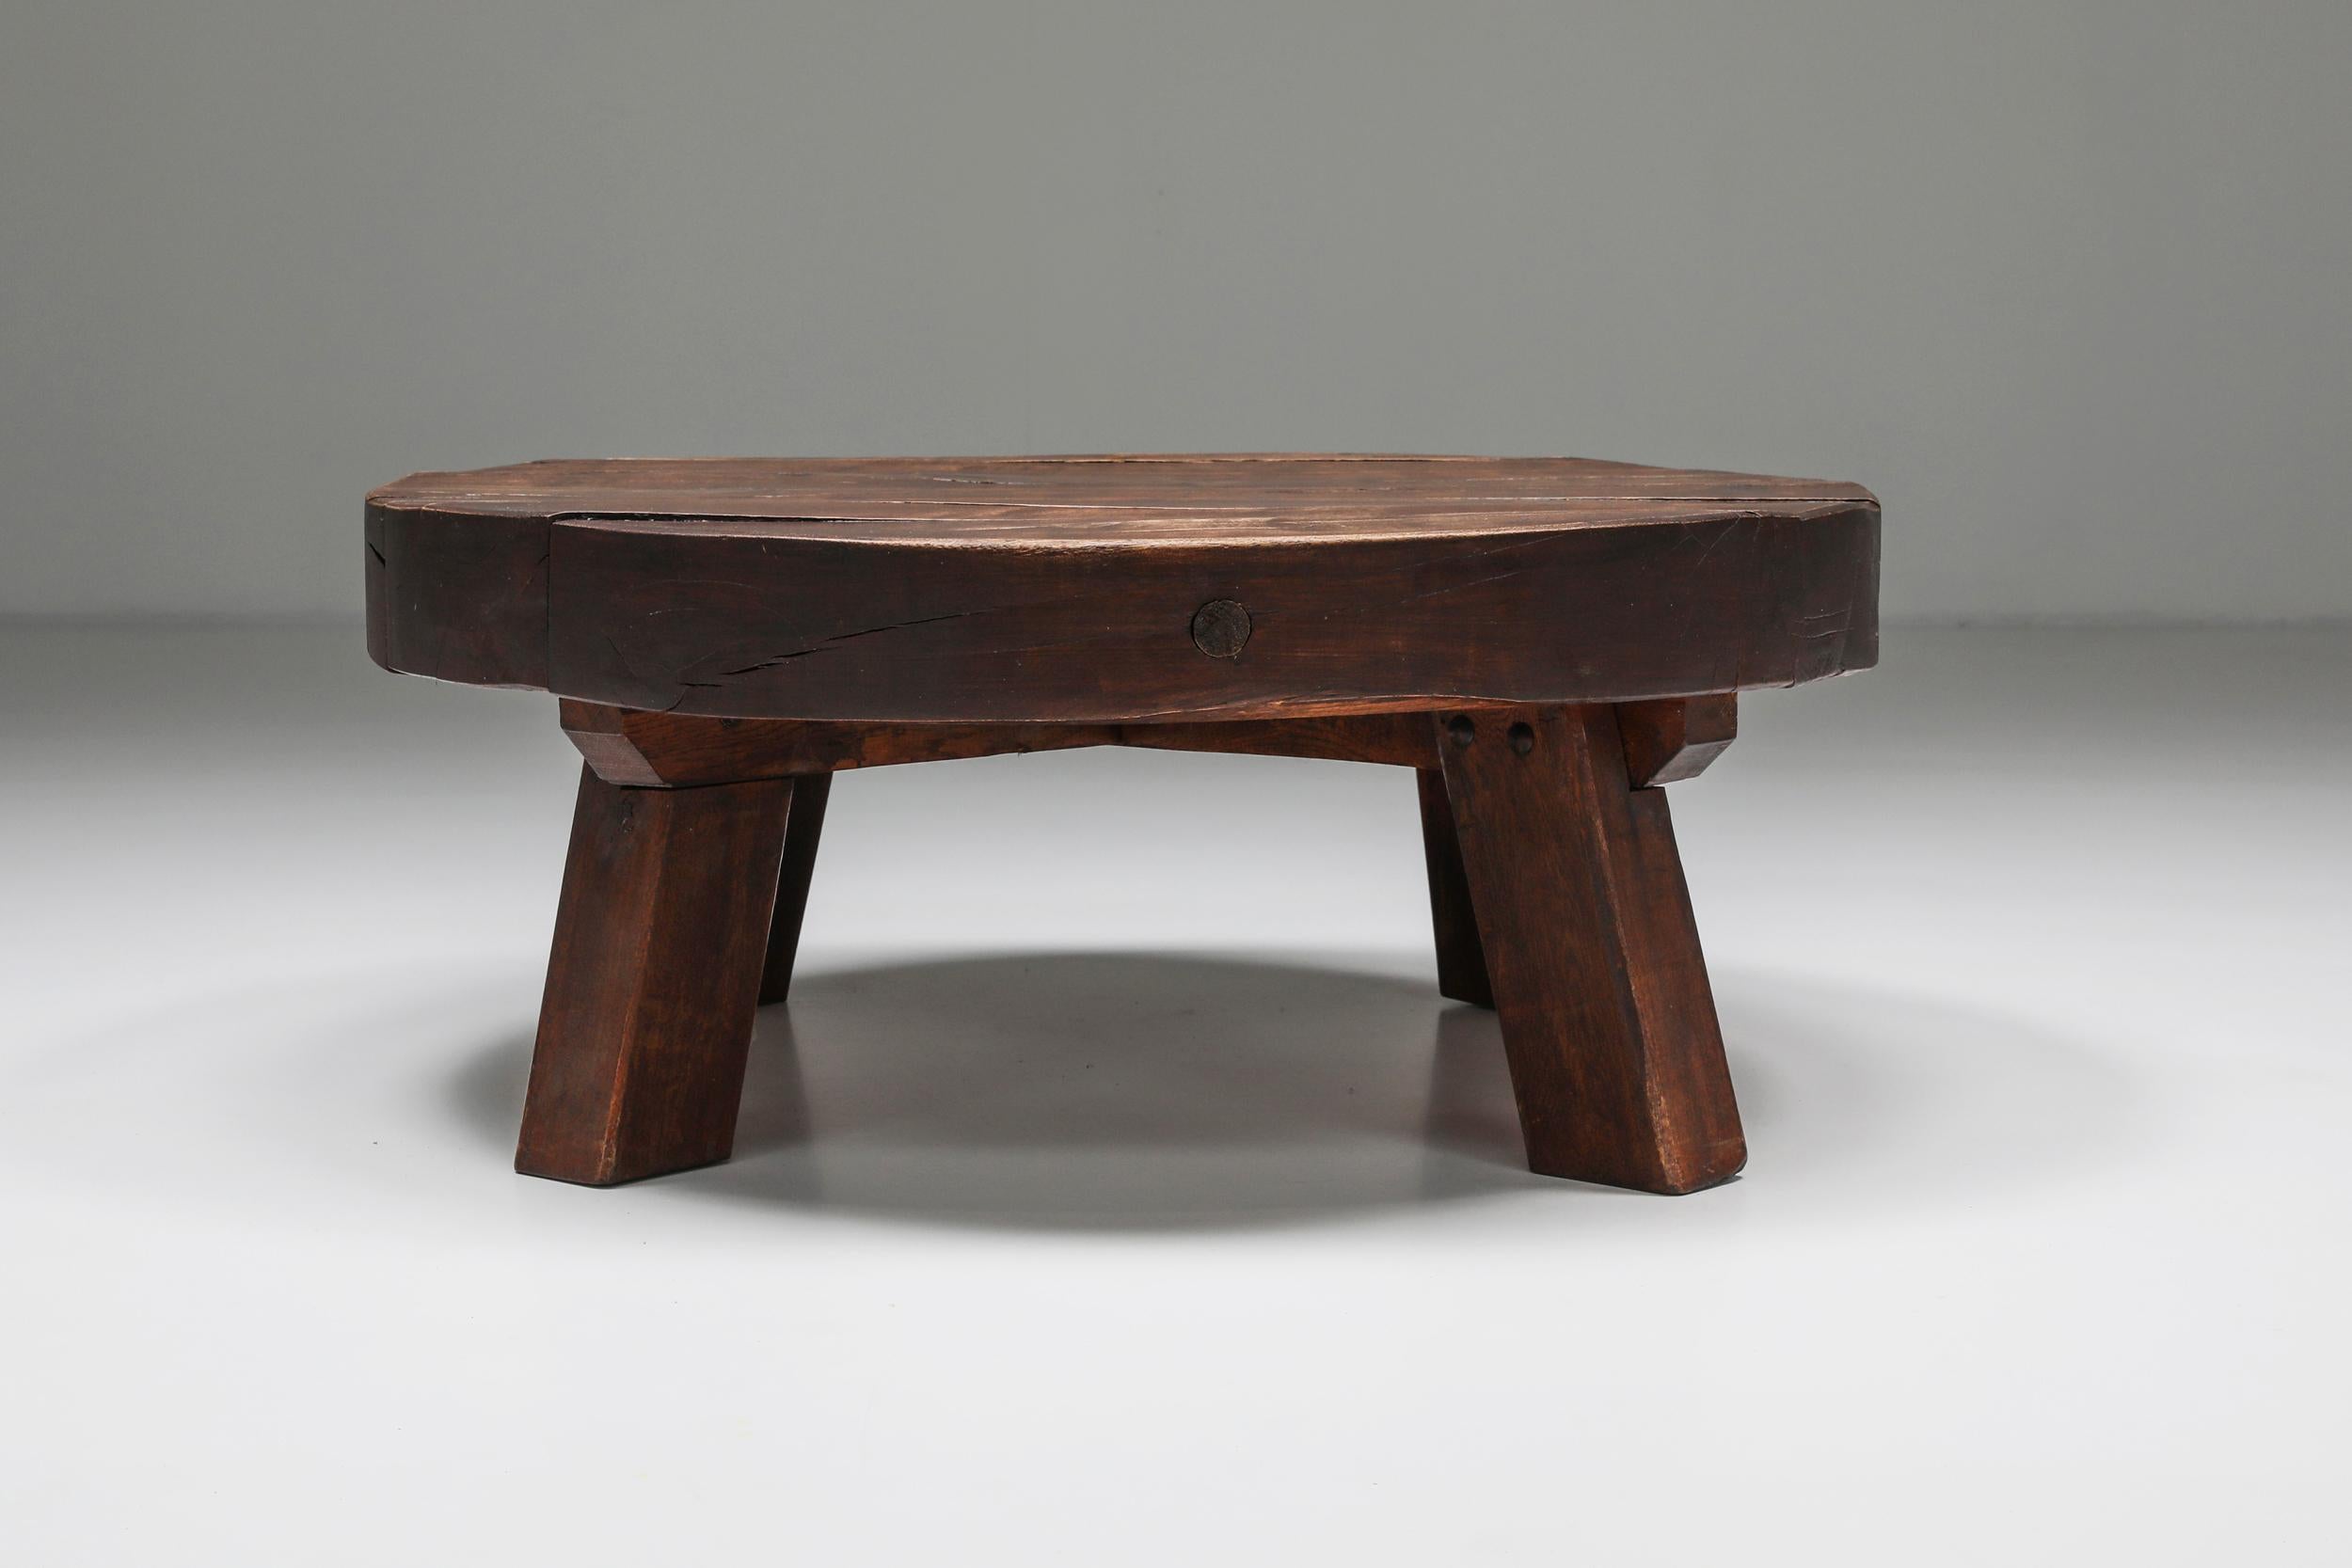 Zen, wabi-sabi, coffee table, side table, solid wood, France, 1960

A rustic modern piece that would fit well in an Axel Vervoordt inspired decor.
A perfect example of a wabi-sabi zen decor, in original condition.